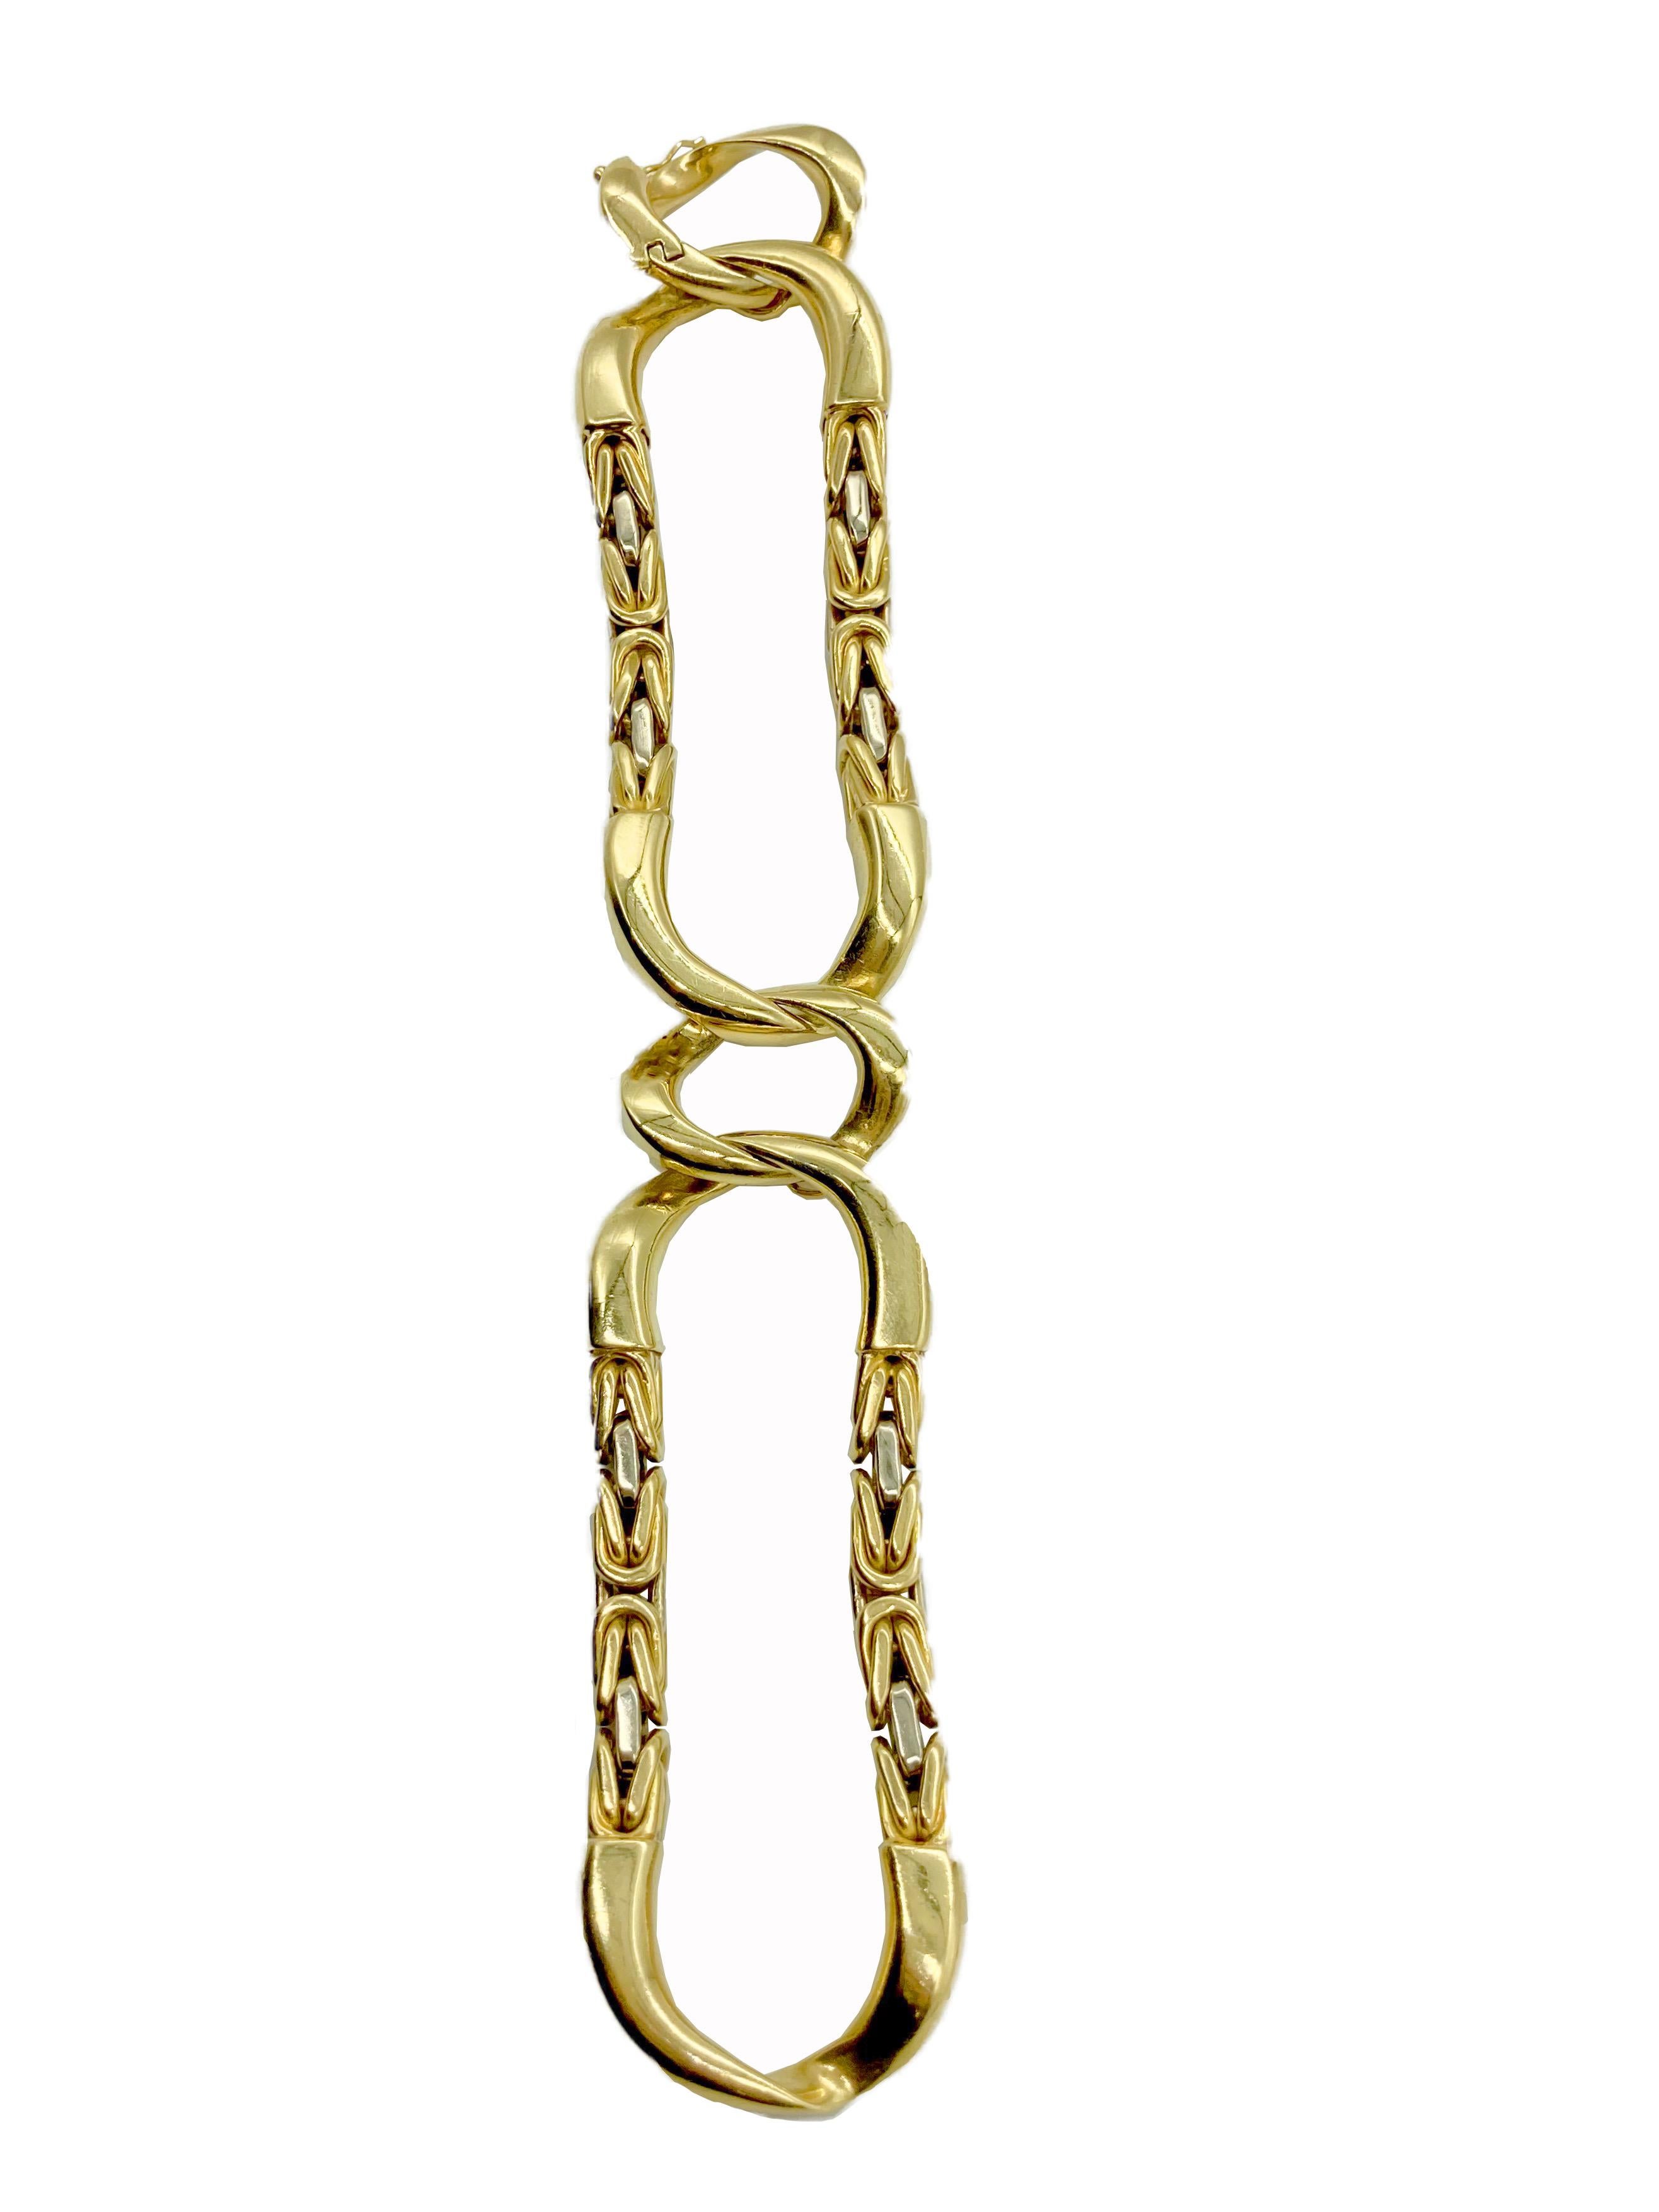 A chic vintage bracelet by Bulgari featuring large 18 karat yellow gold links. Made in Italy, in its original box.